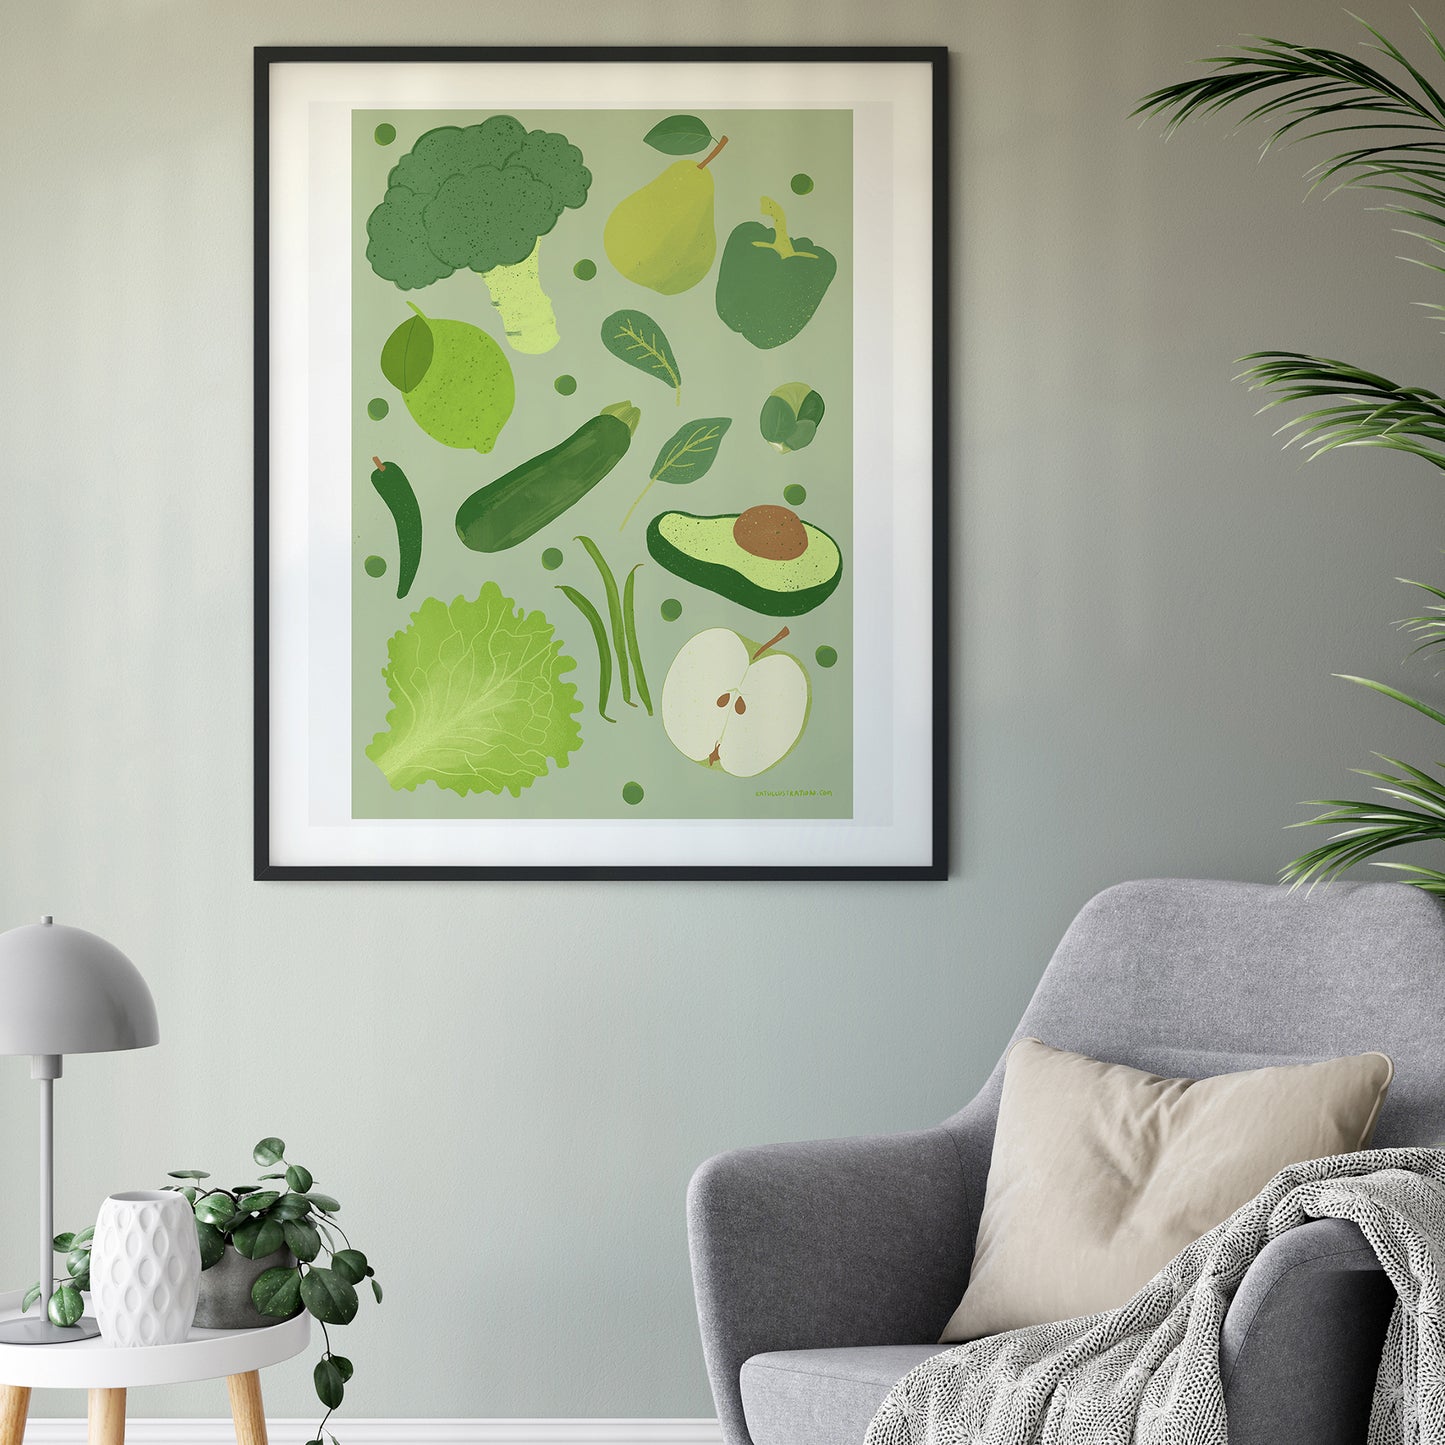 Image of a framed art print of green fruit and vegetables on a green background.